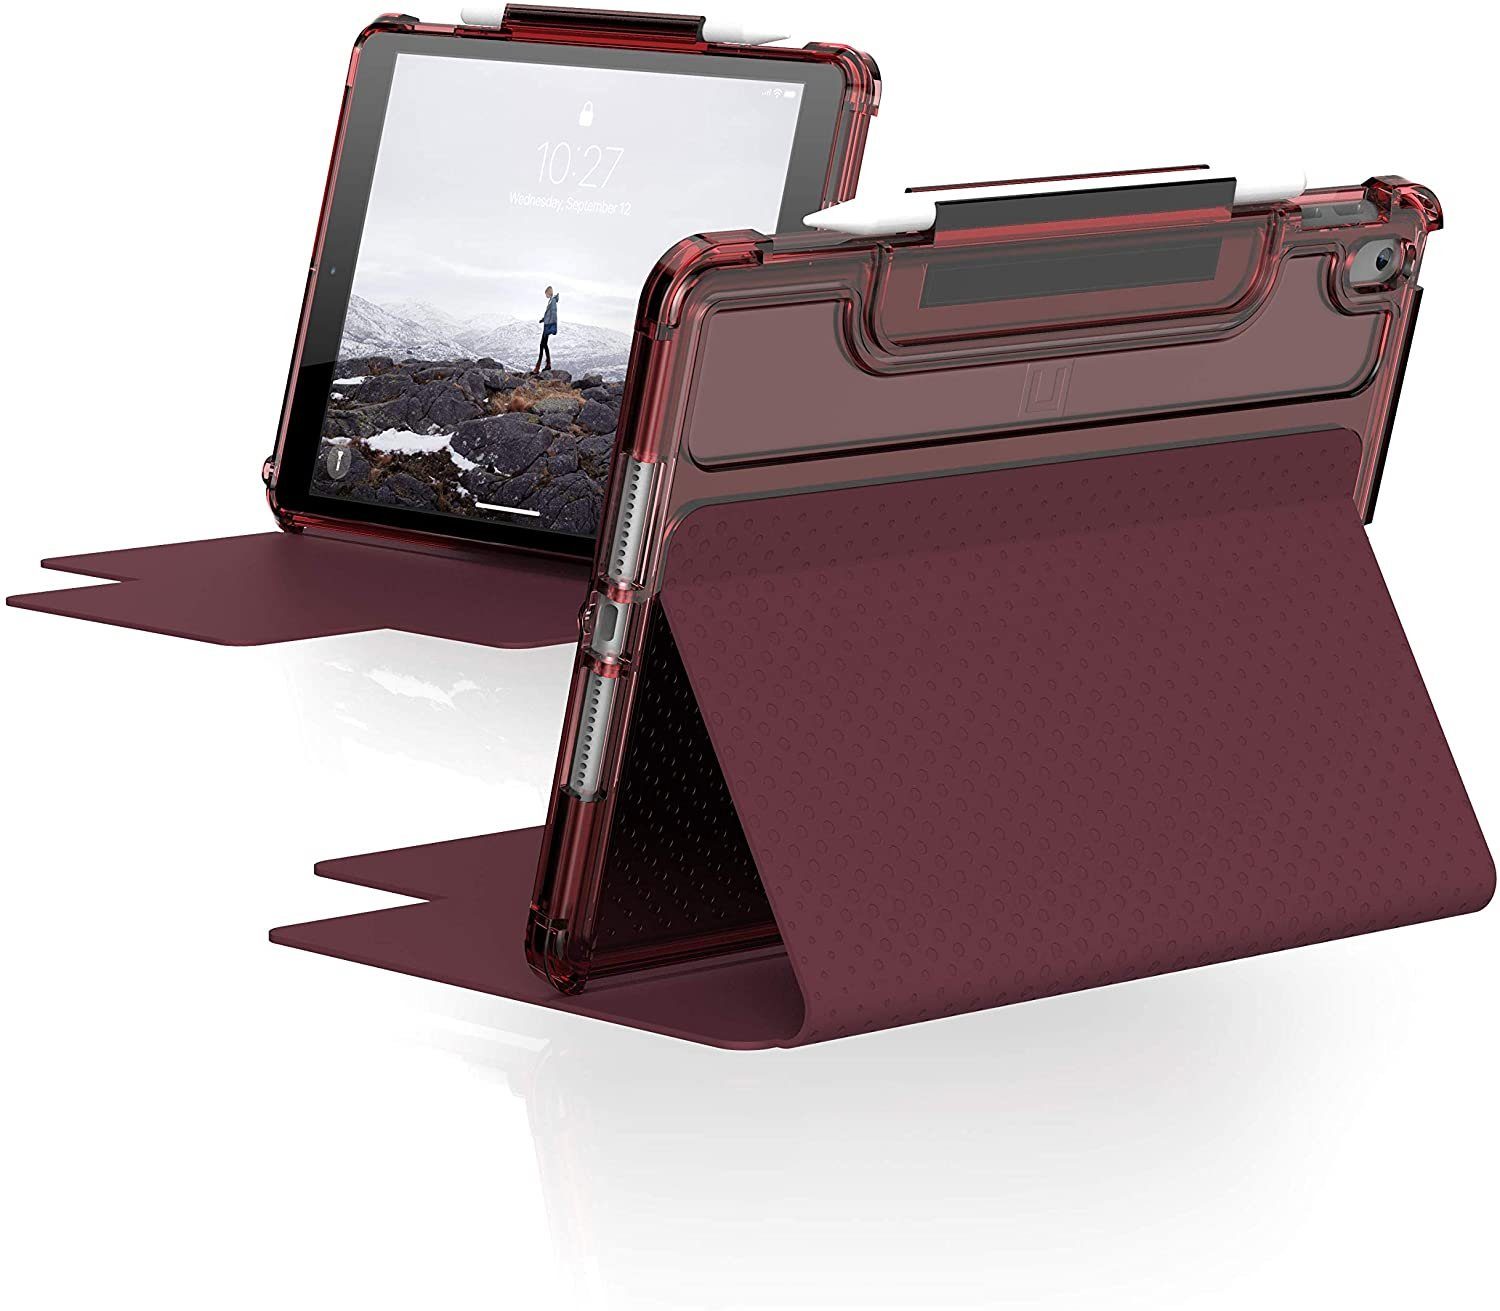 UAG Tablet-Hülle [U] by UAG - Lucent 25,9 cm (10,2 Zoll), (iPad 10.2 Hülle,  Standfunktion, Magnetische Frontklappe mit Wake/Sleep Funktion, Apple  Pencil Halterung) - aubergine / dusty rose